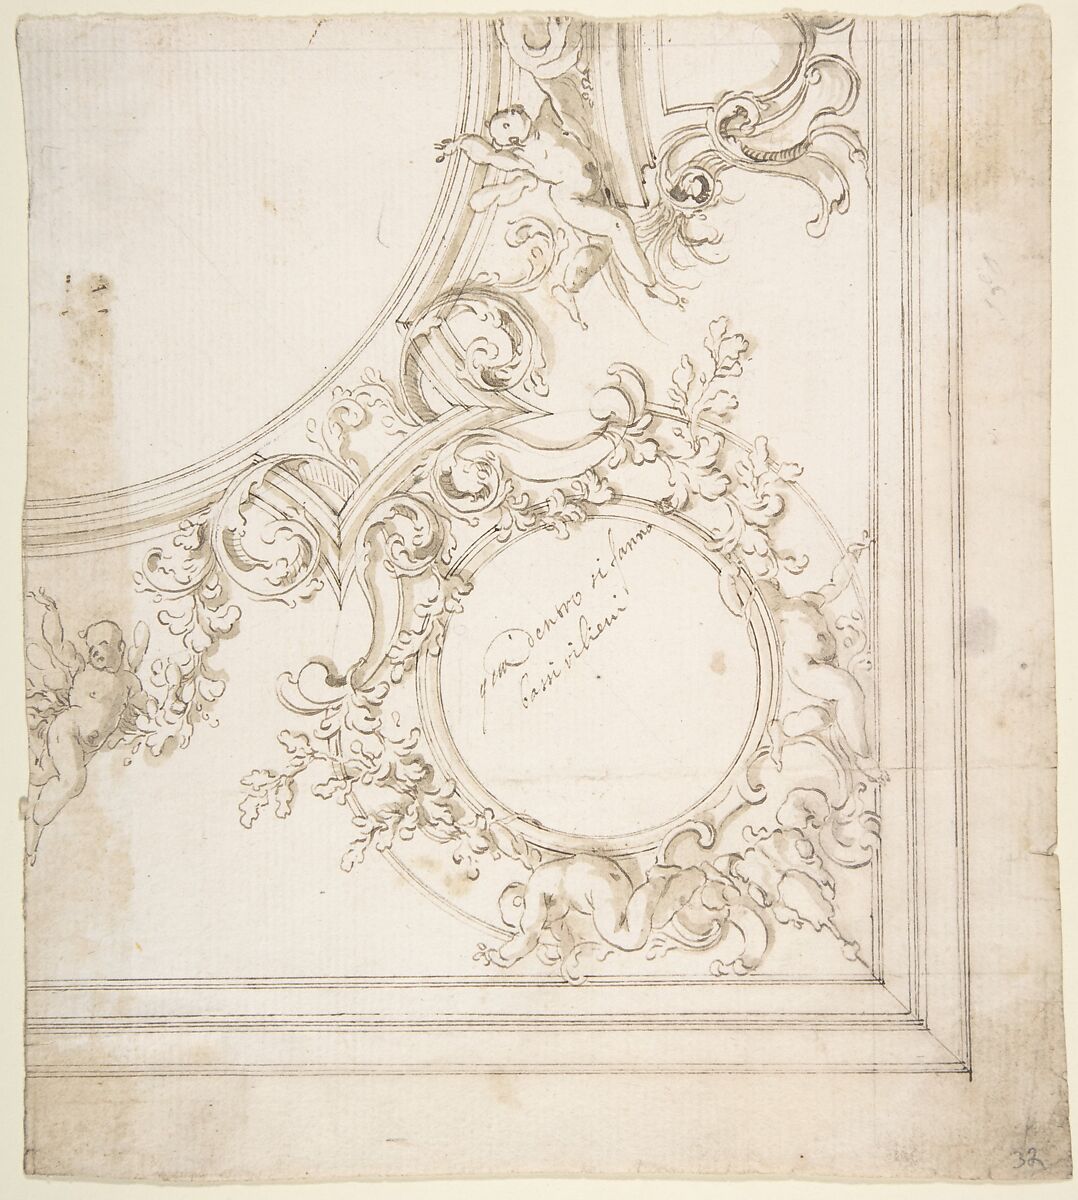 Design for a Ceiling Decoration., Donato Giuseppe Frisoni (Italian, Laino near Como 1683–1735 Ludwigsburg), Pen and brown ink, brush and gray-brown wash, over graphite or leadpoint with ruled and compass construction 